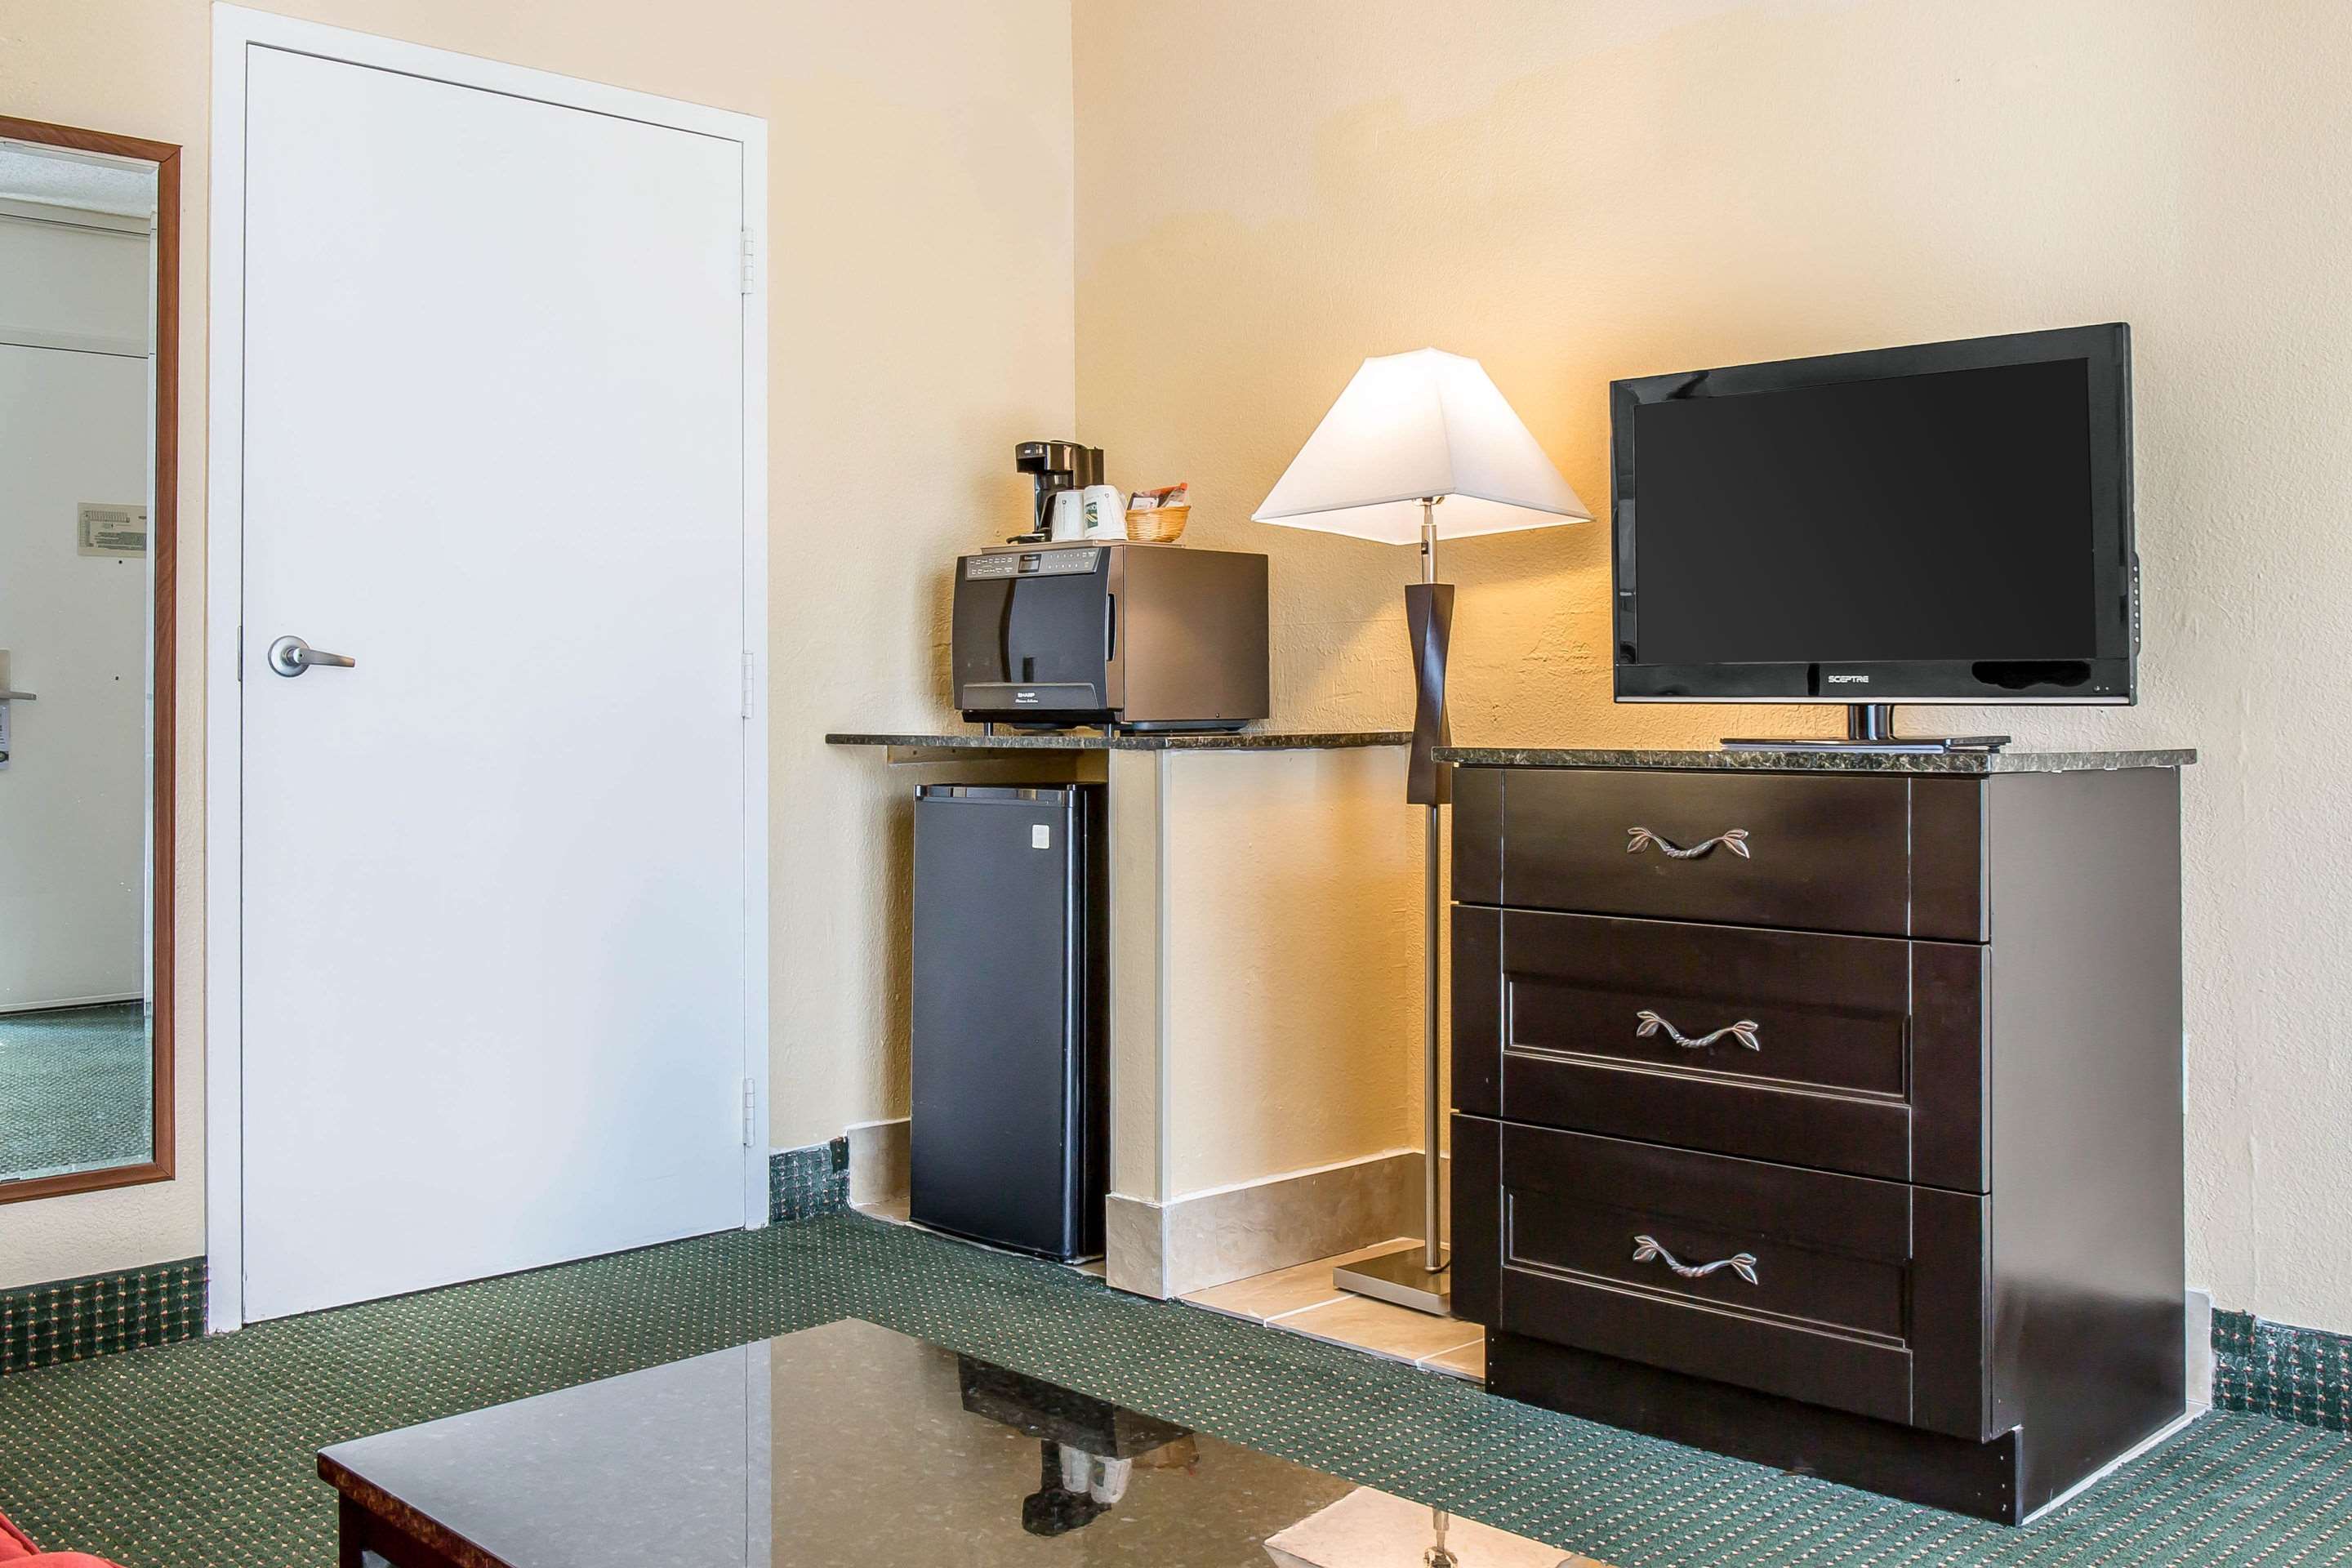 Quality Suites Near Orange County Convention Center